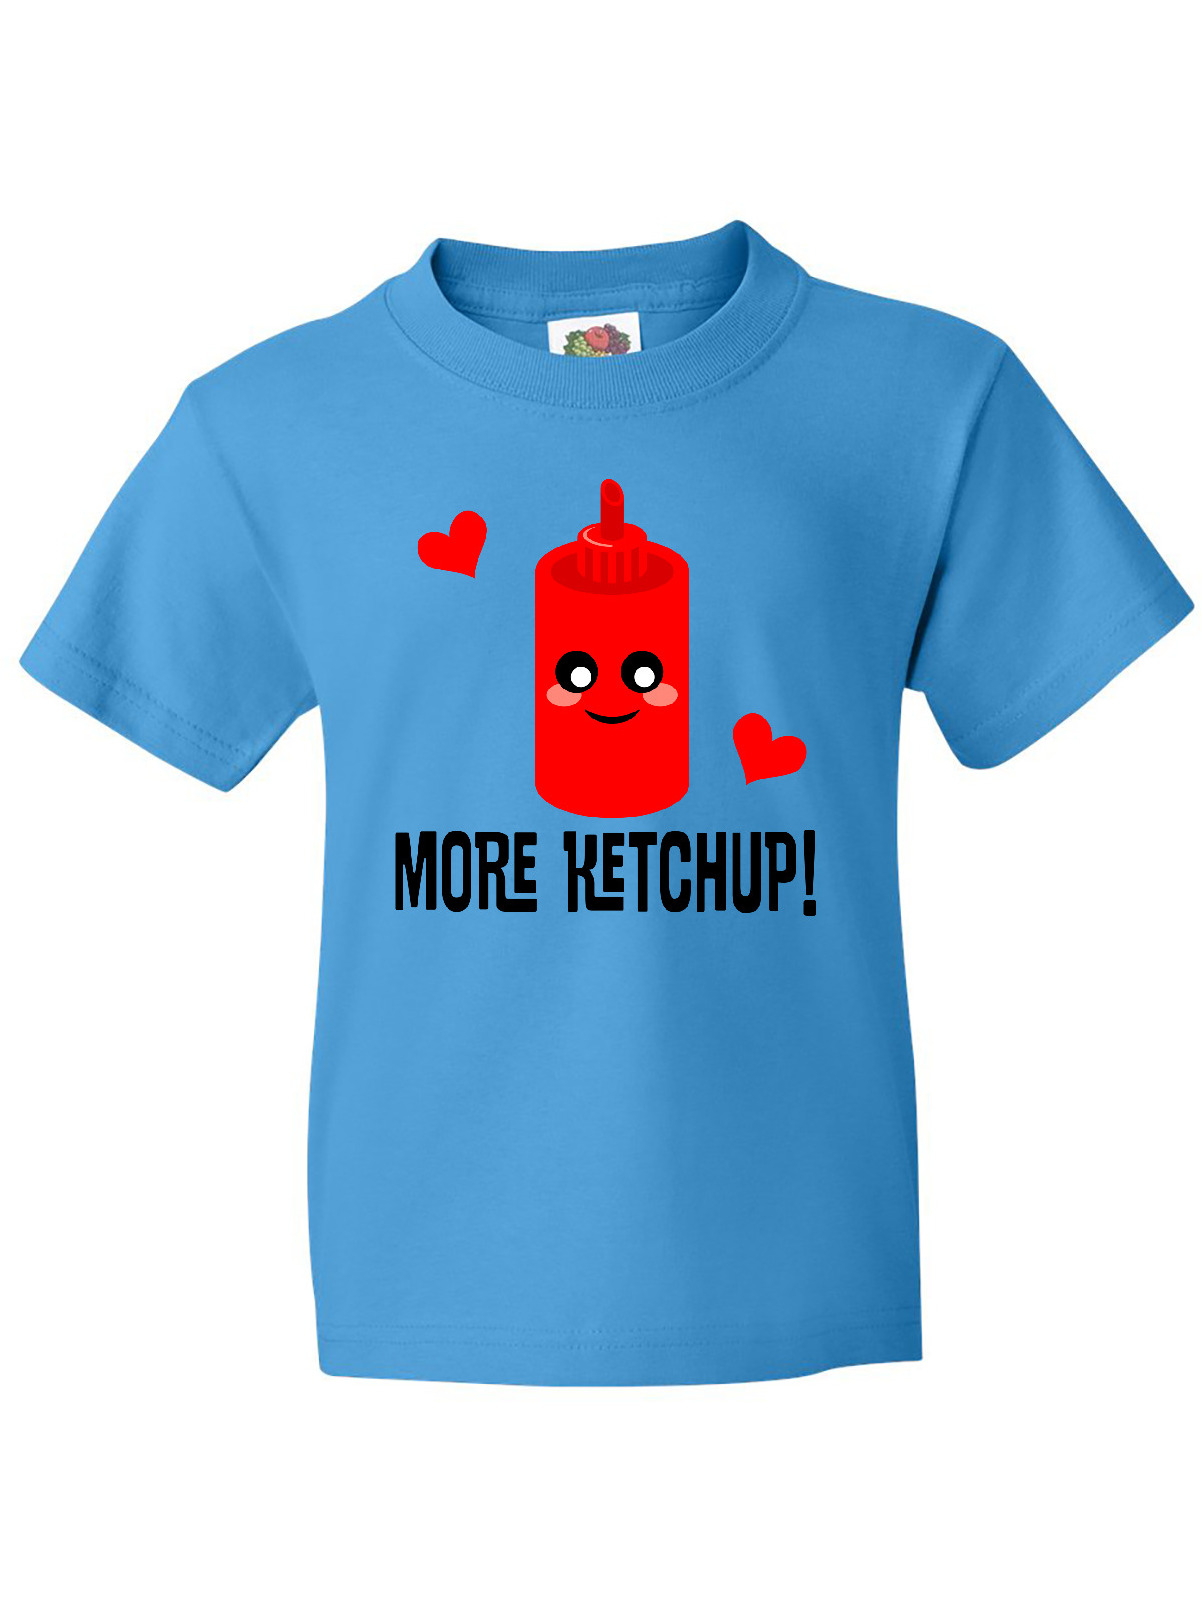 Inktastic Ketchup Lover Funny Youth T-Shirt - image 1 of 4